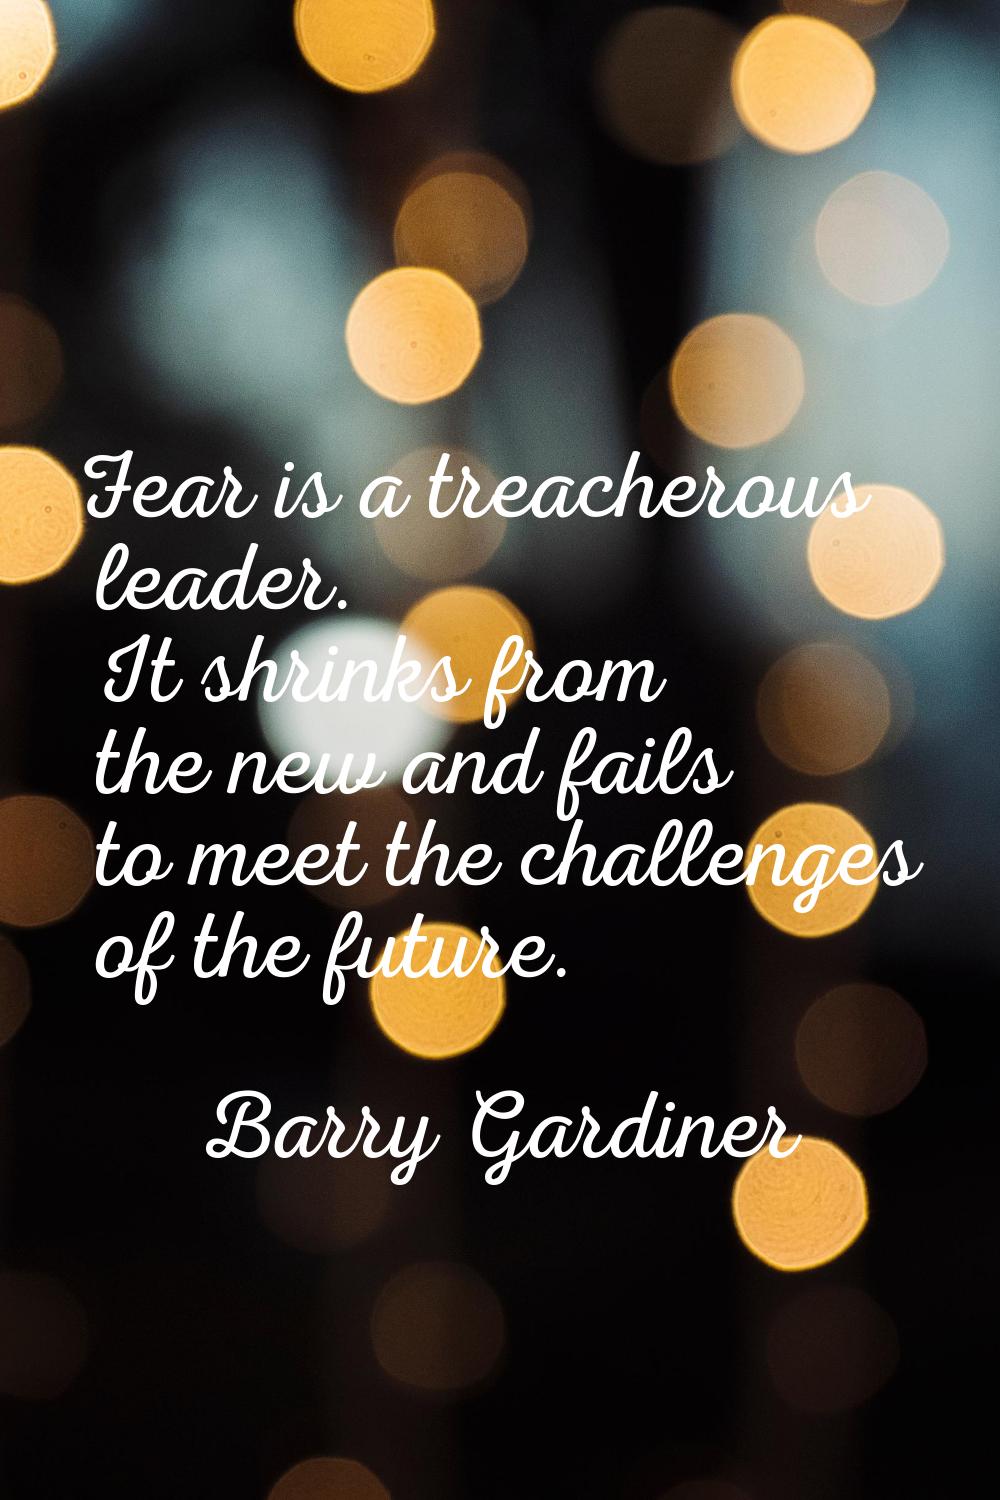 Fear is a treacherous leader. It shrinks from the new and fails to meet the challenges of the futur